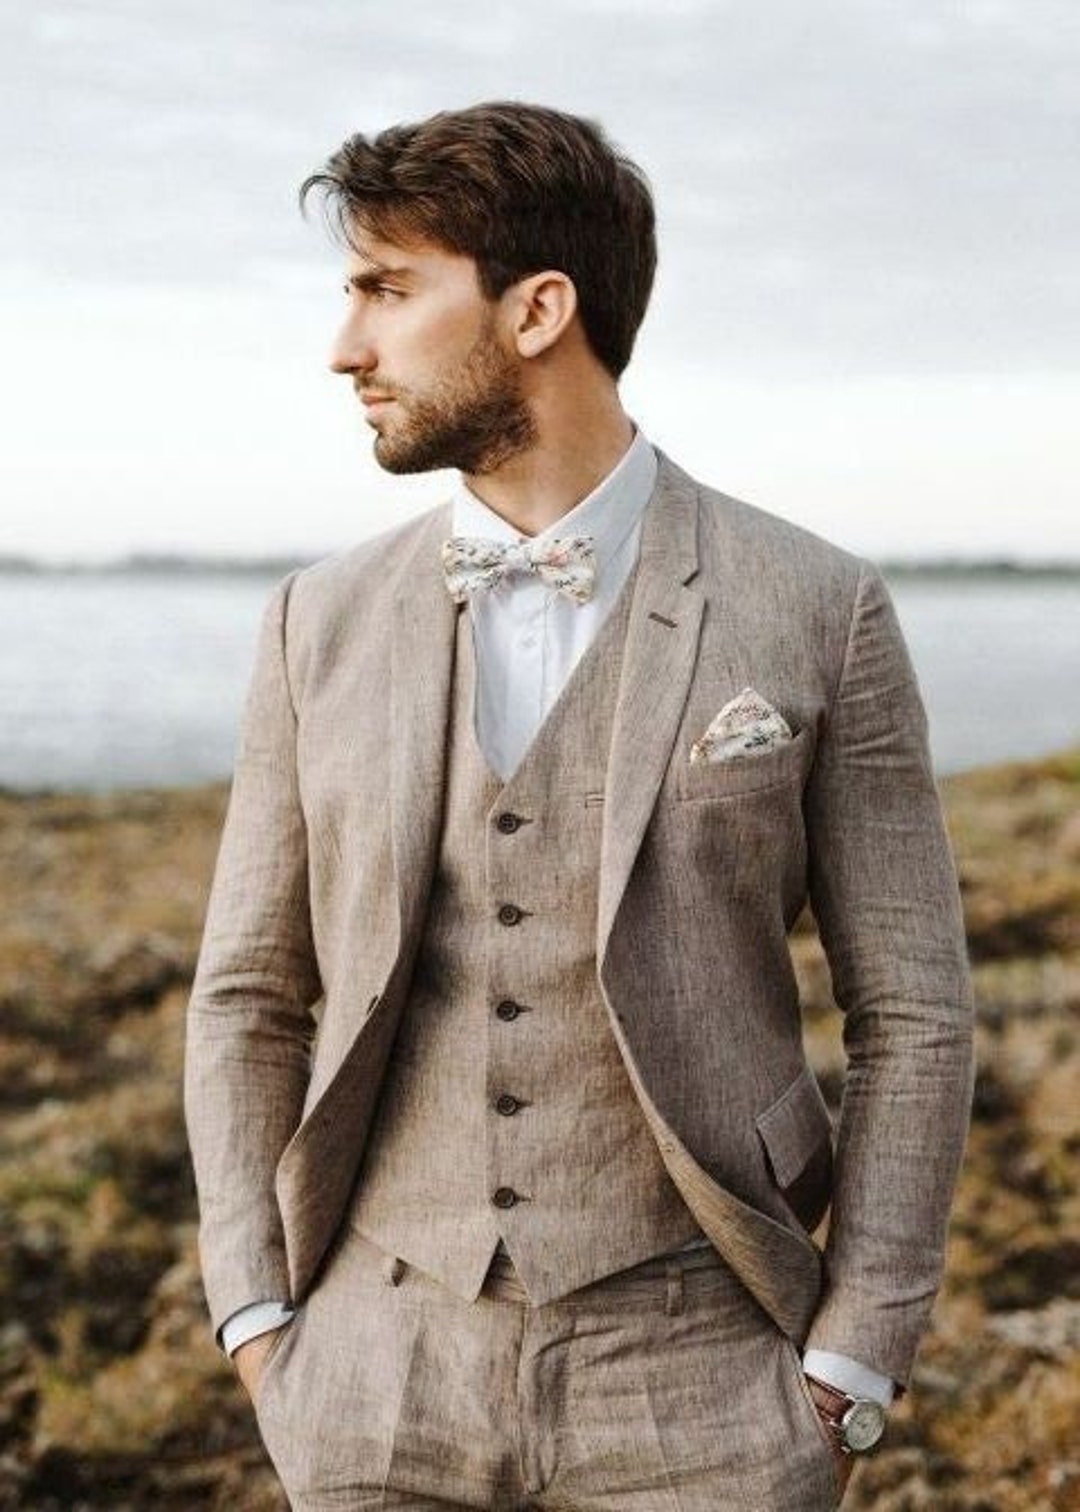 Beige Notch Lapel Champagne Wedding Tuxedos Suit For Groom, Best Man, And  Best Day Includes Jacket, Vest, Pants Perfect For Prom, Dinner, Or Wedding  From Kerr_miranda, $85.43 | DHgate.Com